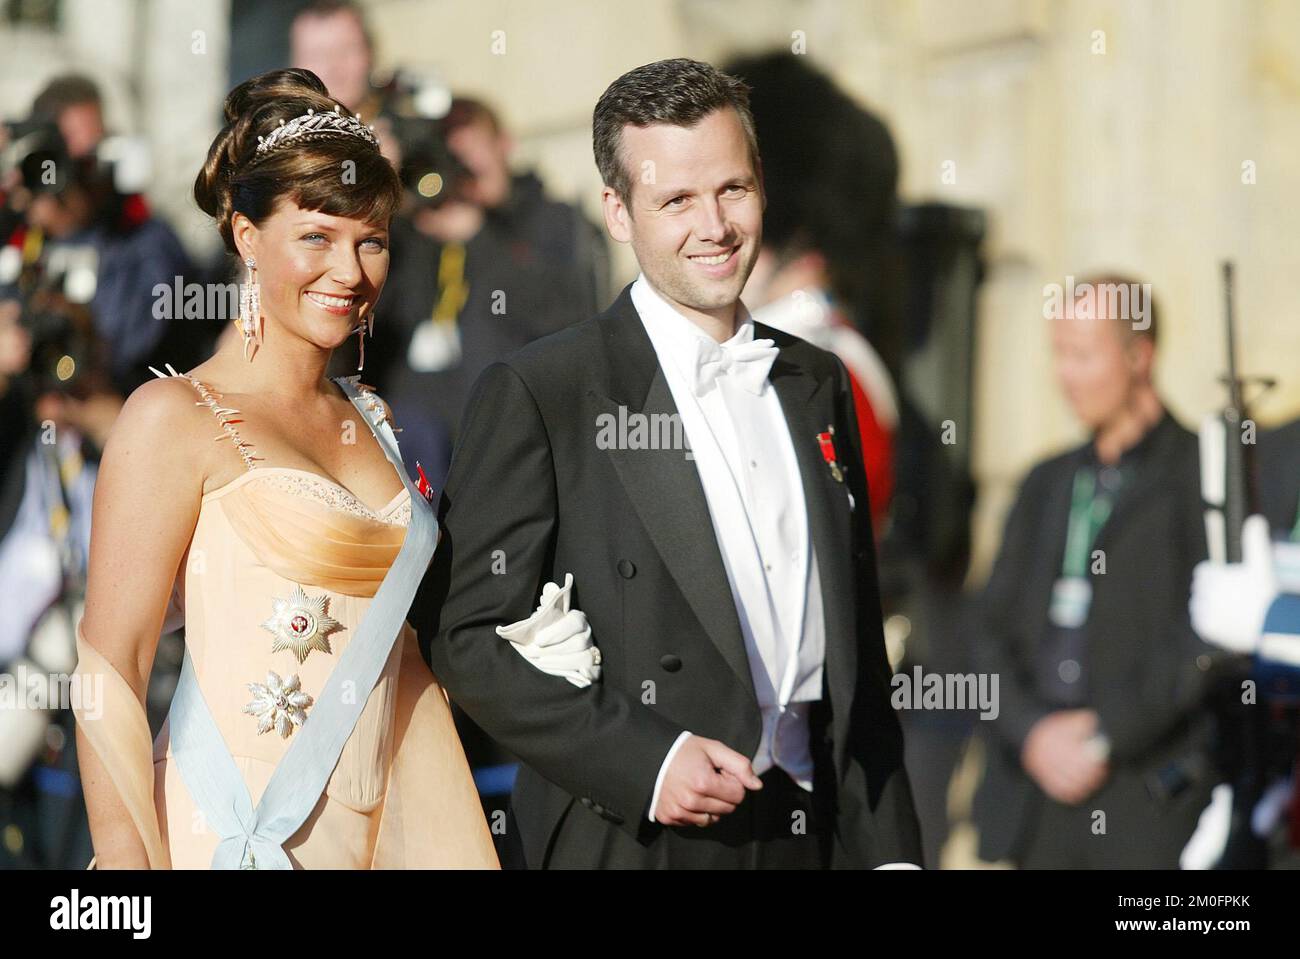 The Princess Marthe Louise from Norway and her husbond Ari Behn  arrive for a Gala performance in The Royal Theatre in Copenhagen before the Royal Wedding tomorrow. Stock Photo